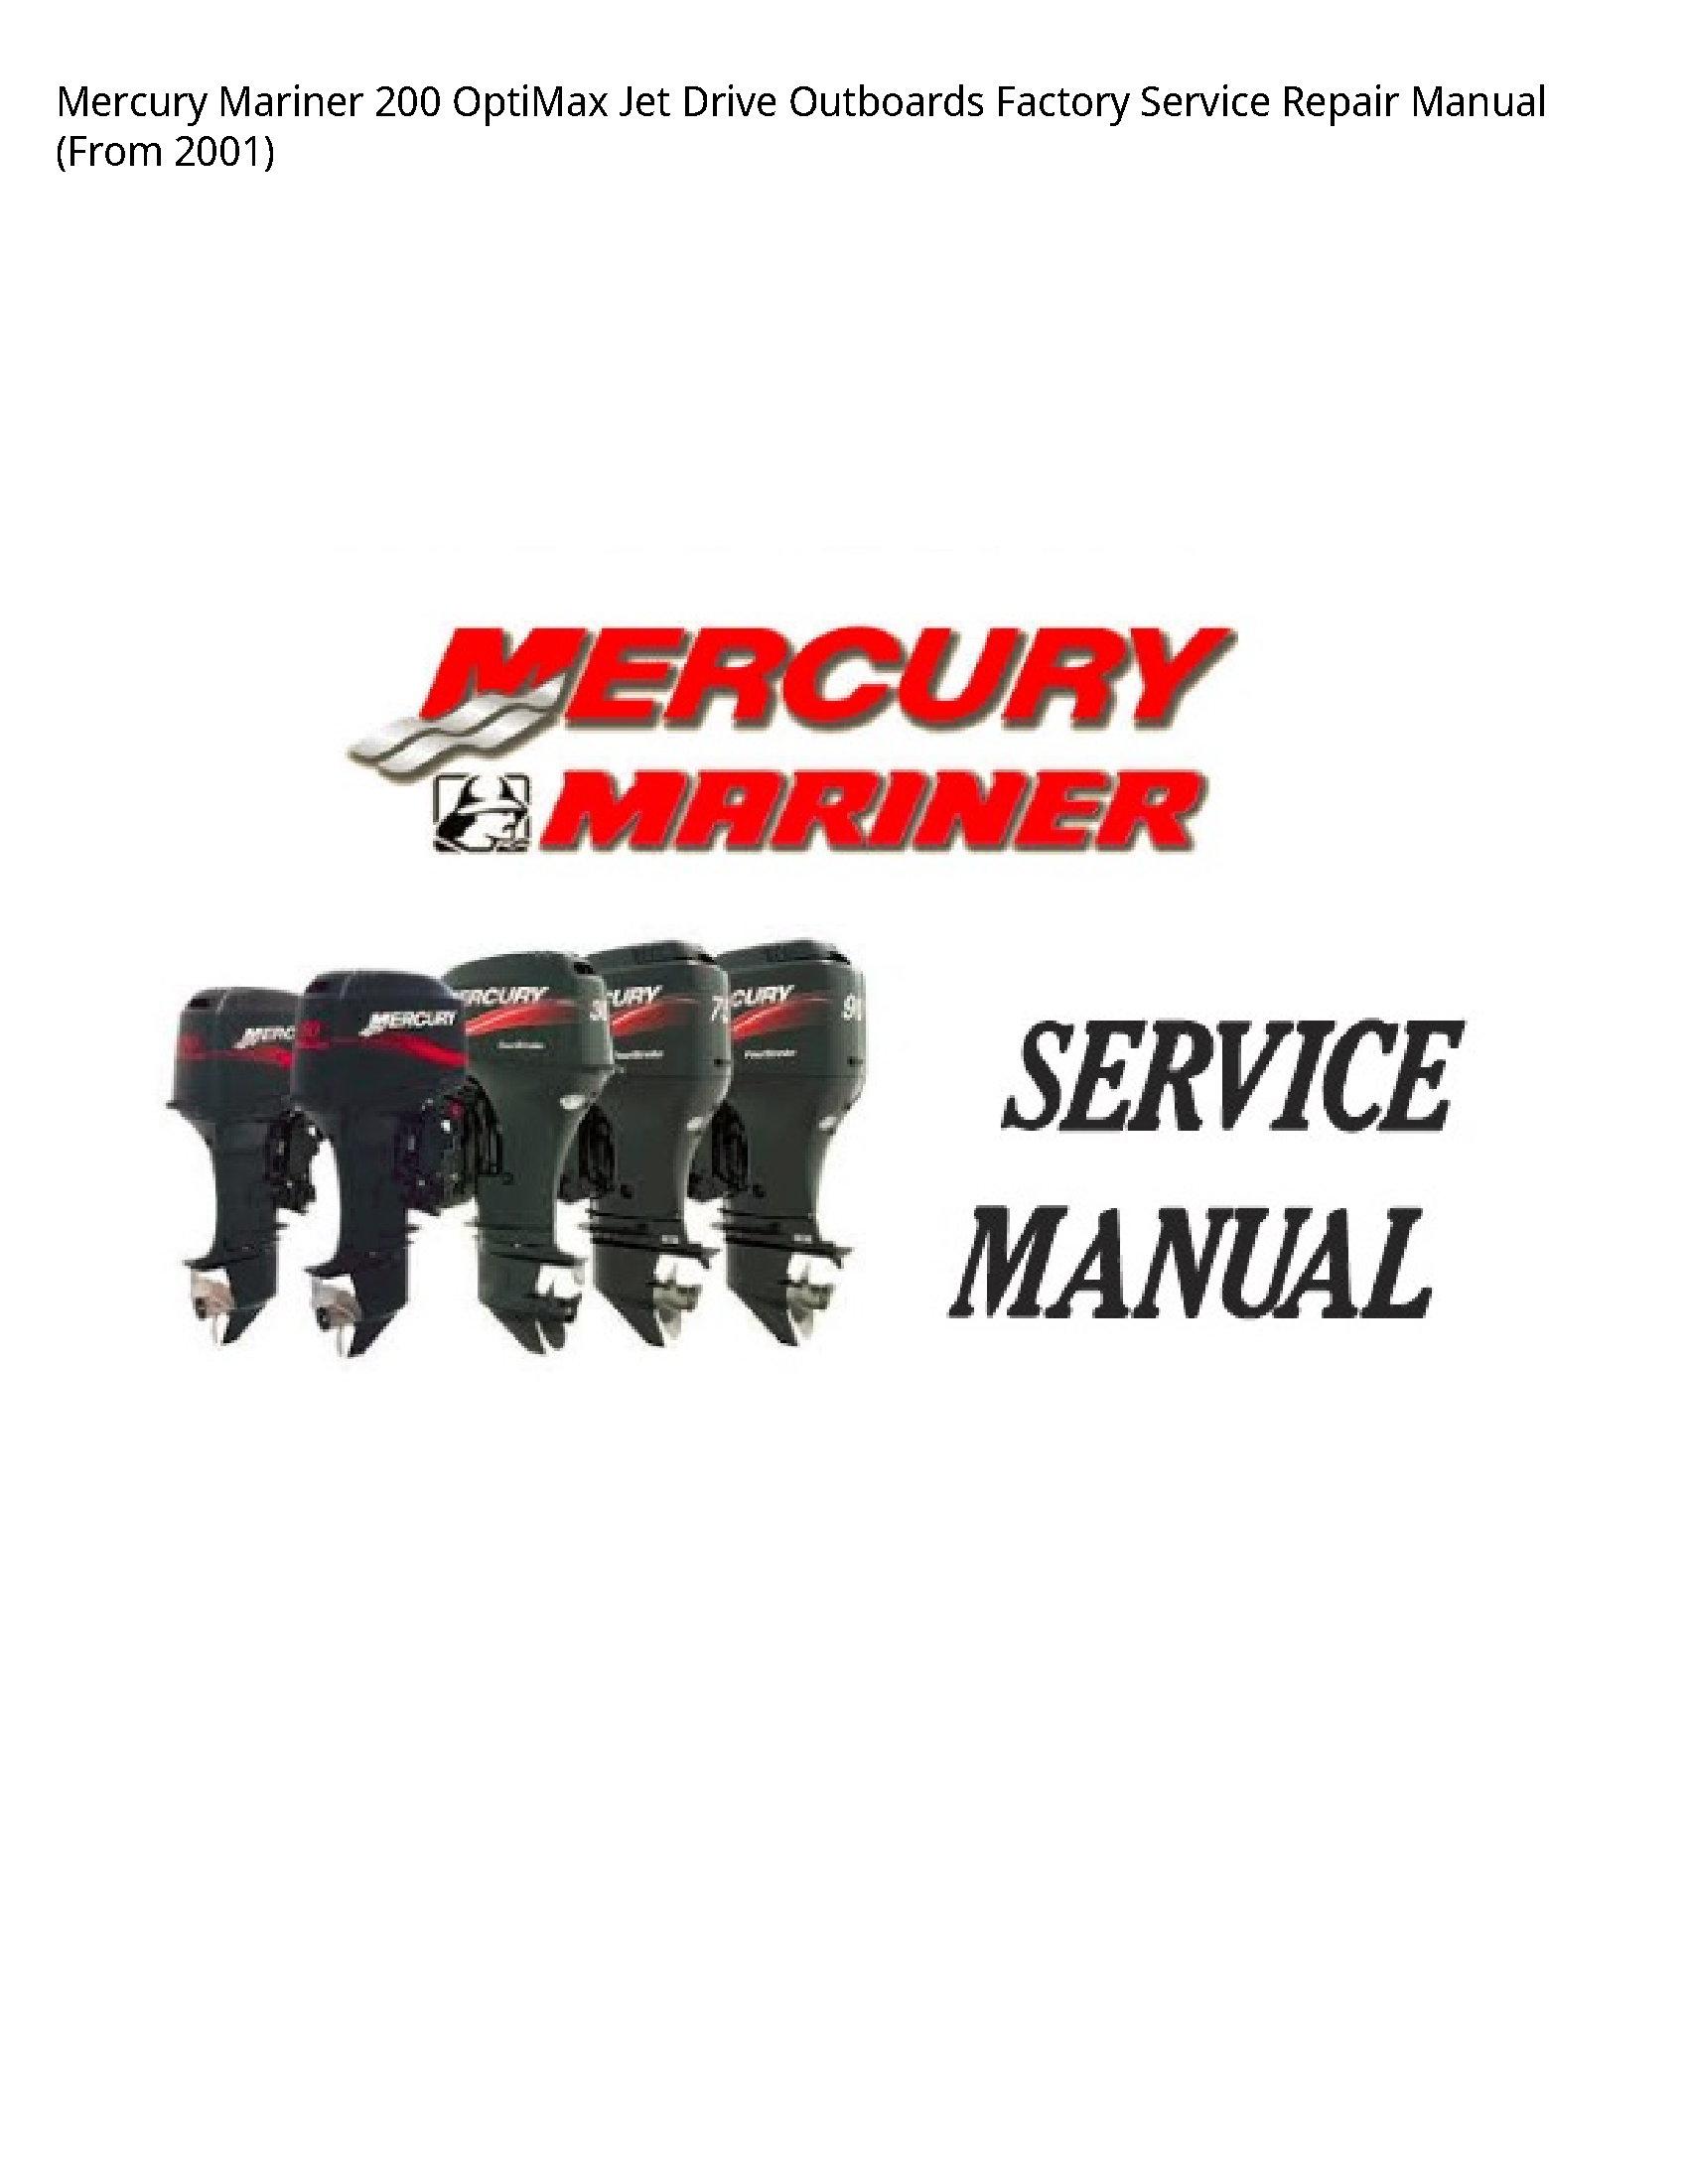 Mercury Mariner 200 OptiMax Jet Drive Outboards Factory manual